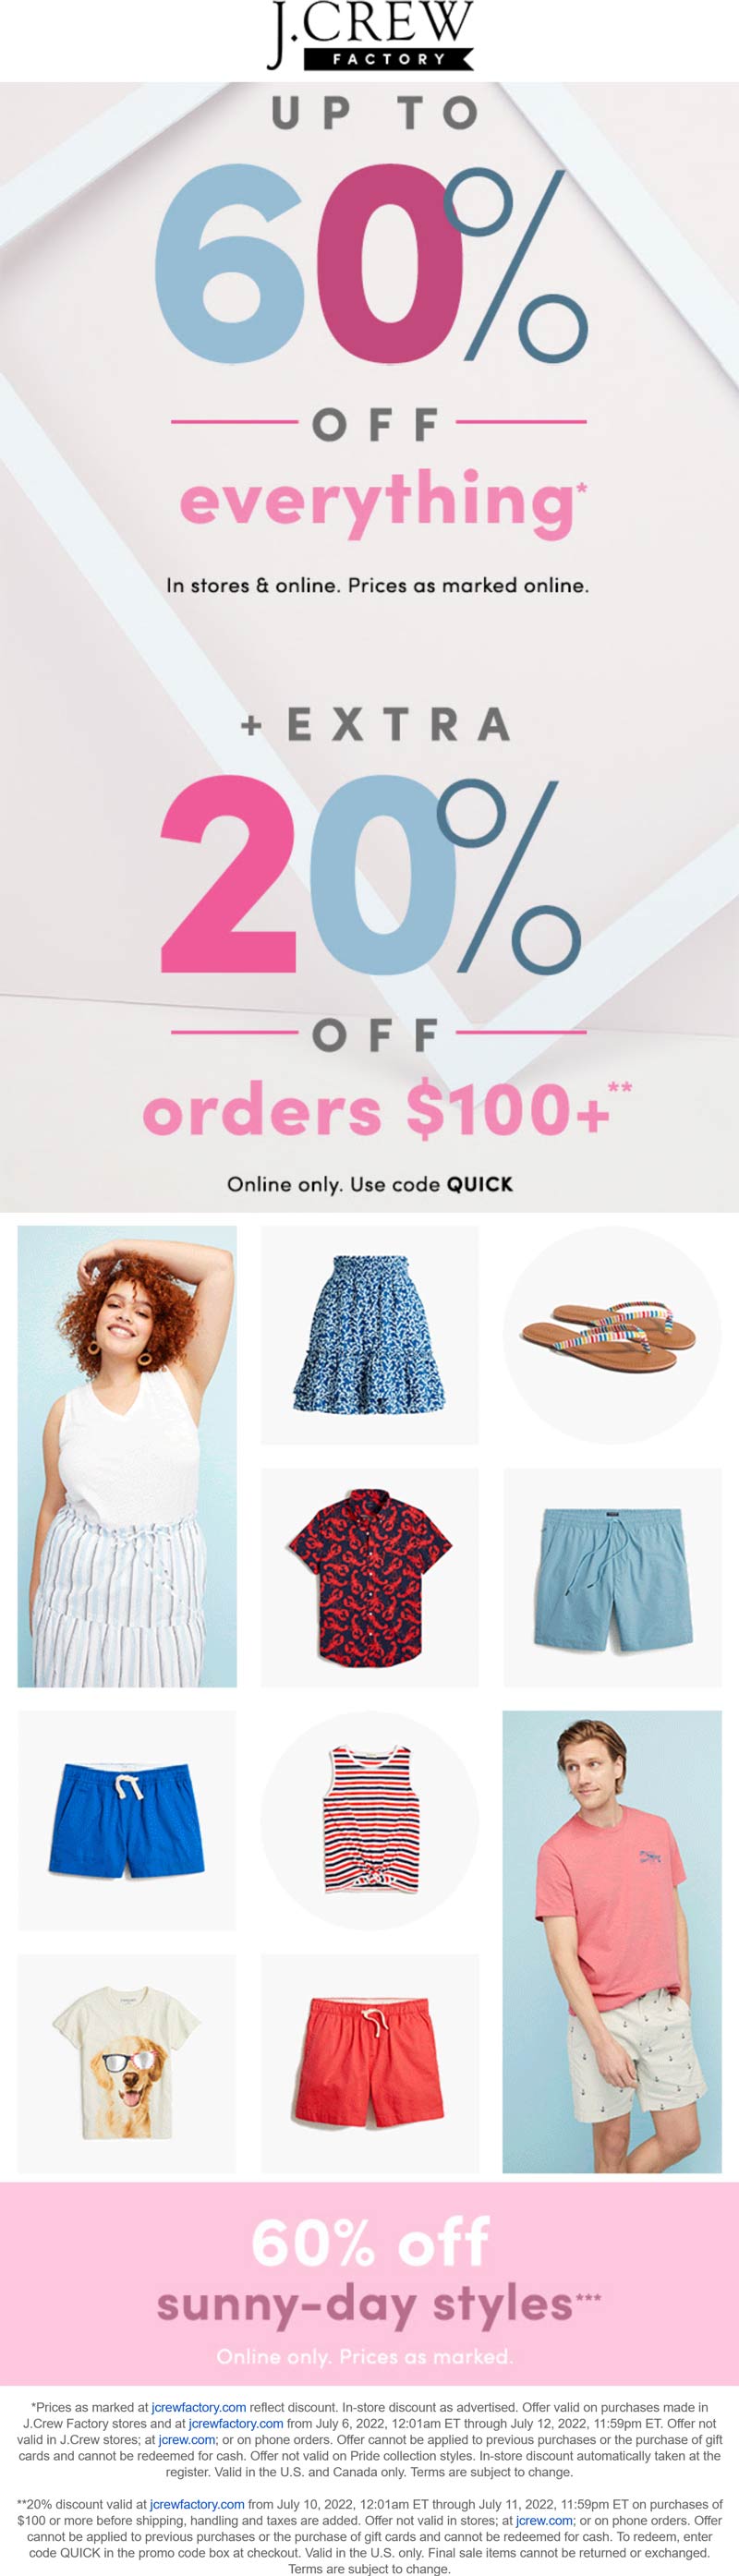 J.Crew Factory stores Coupon  Extra 20% off $100 & more at J.Crew Factory, or online via promo code QUICK #jcrewfactory 